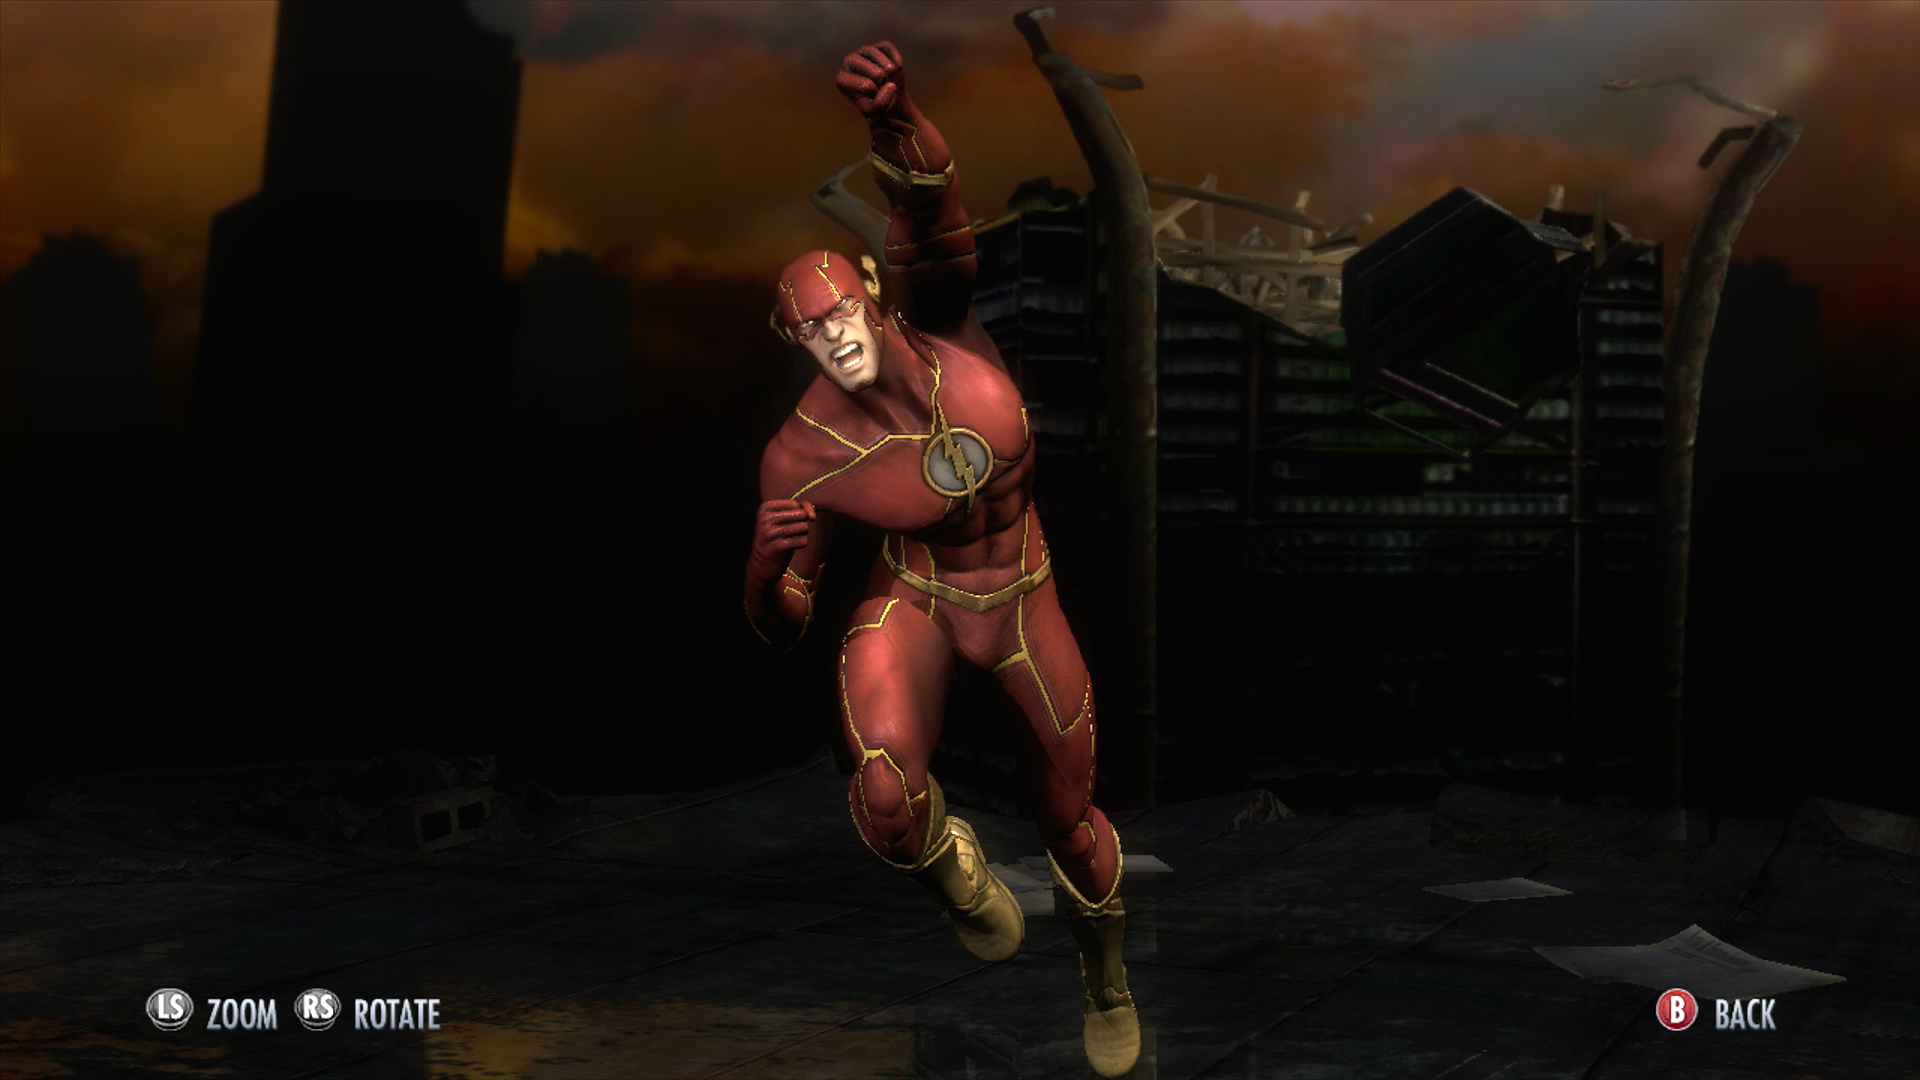 Video Game Injustice Gods Among Us 1920x1080